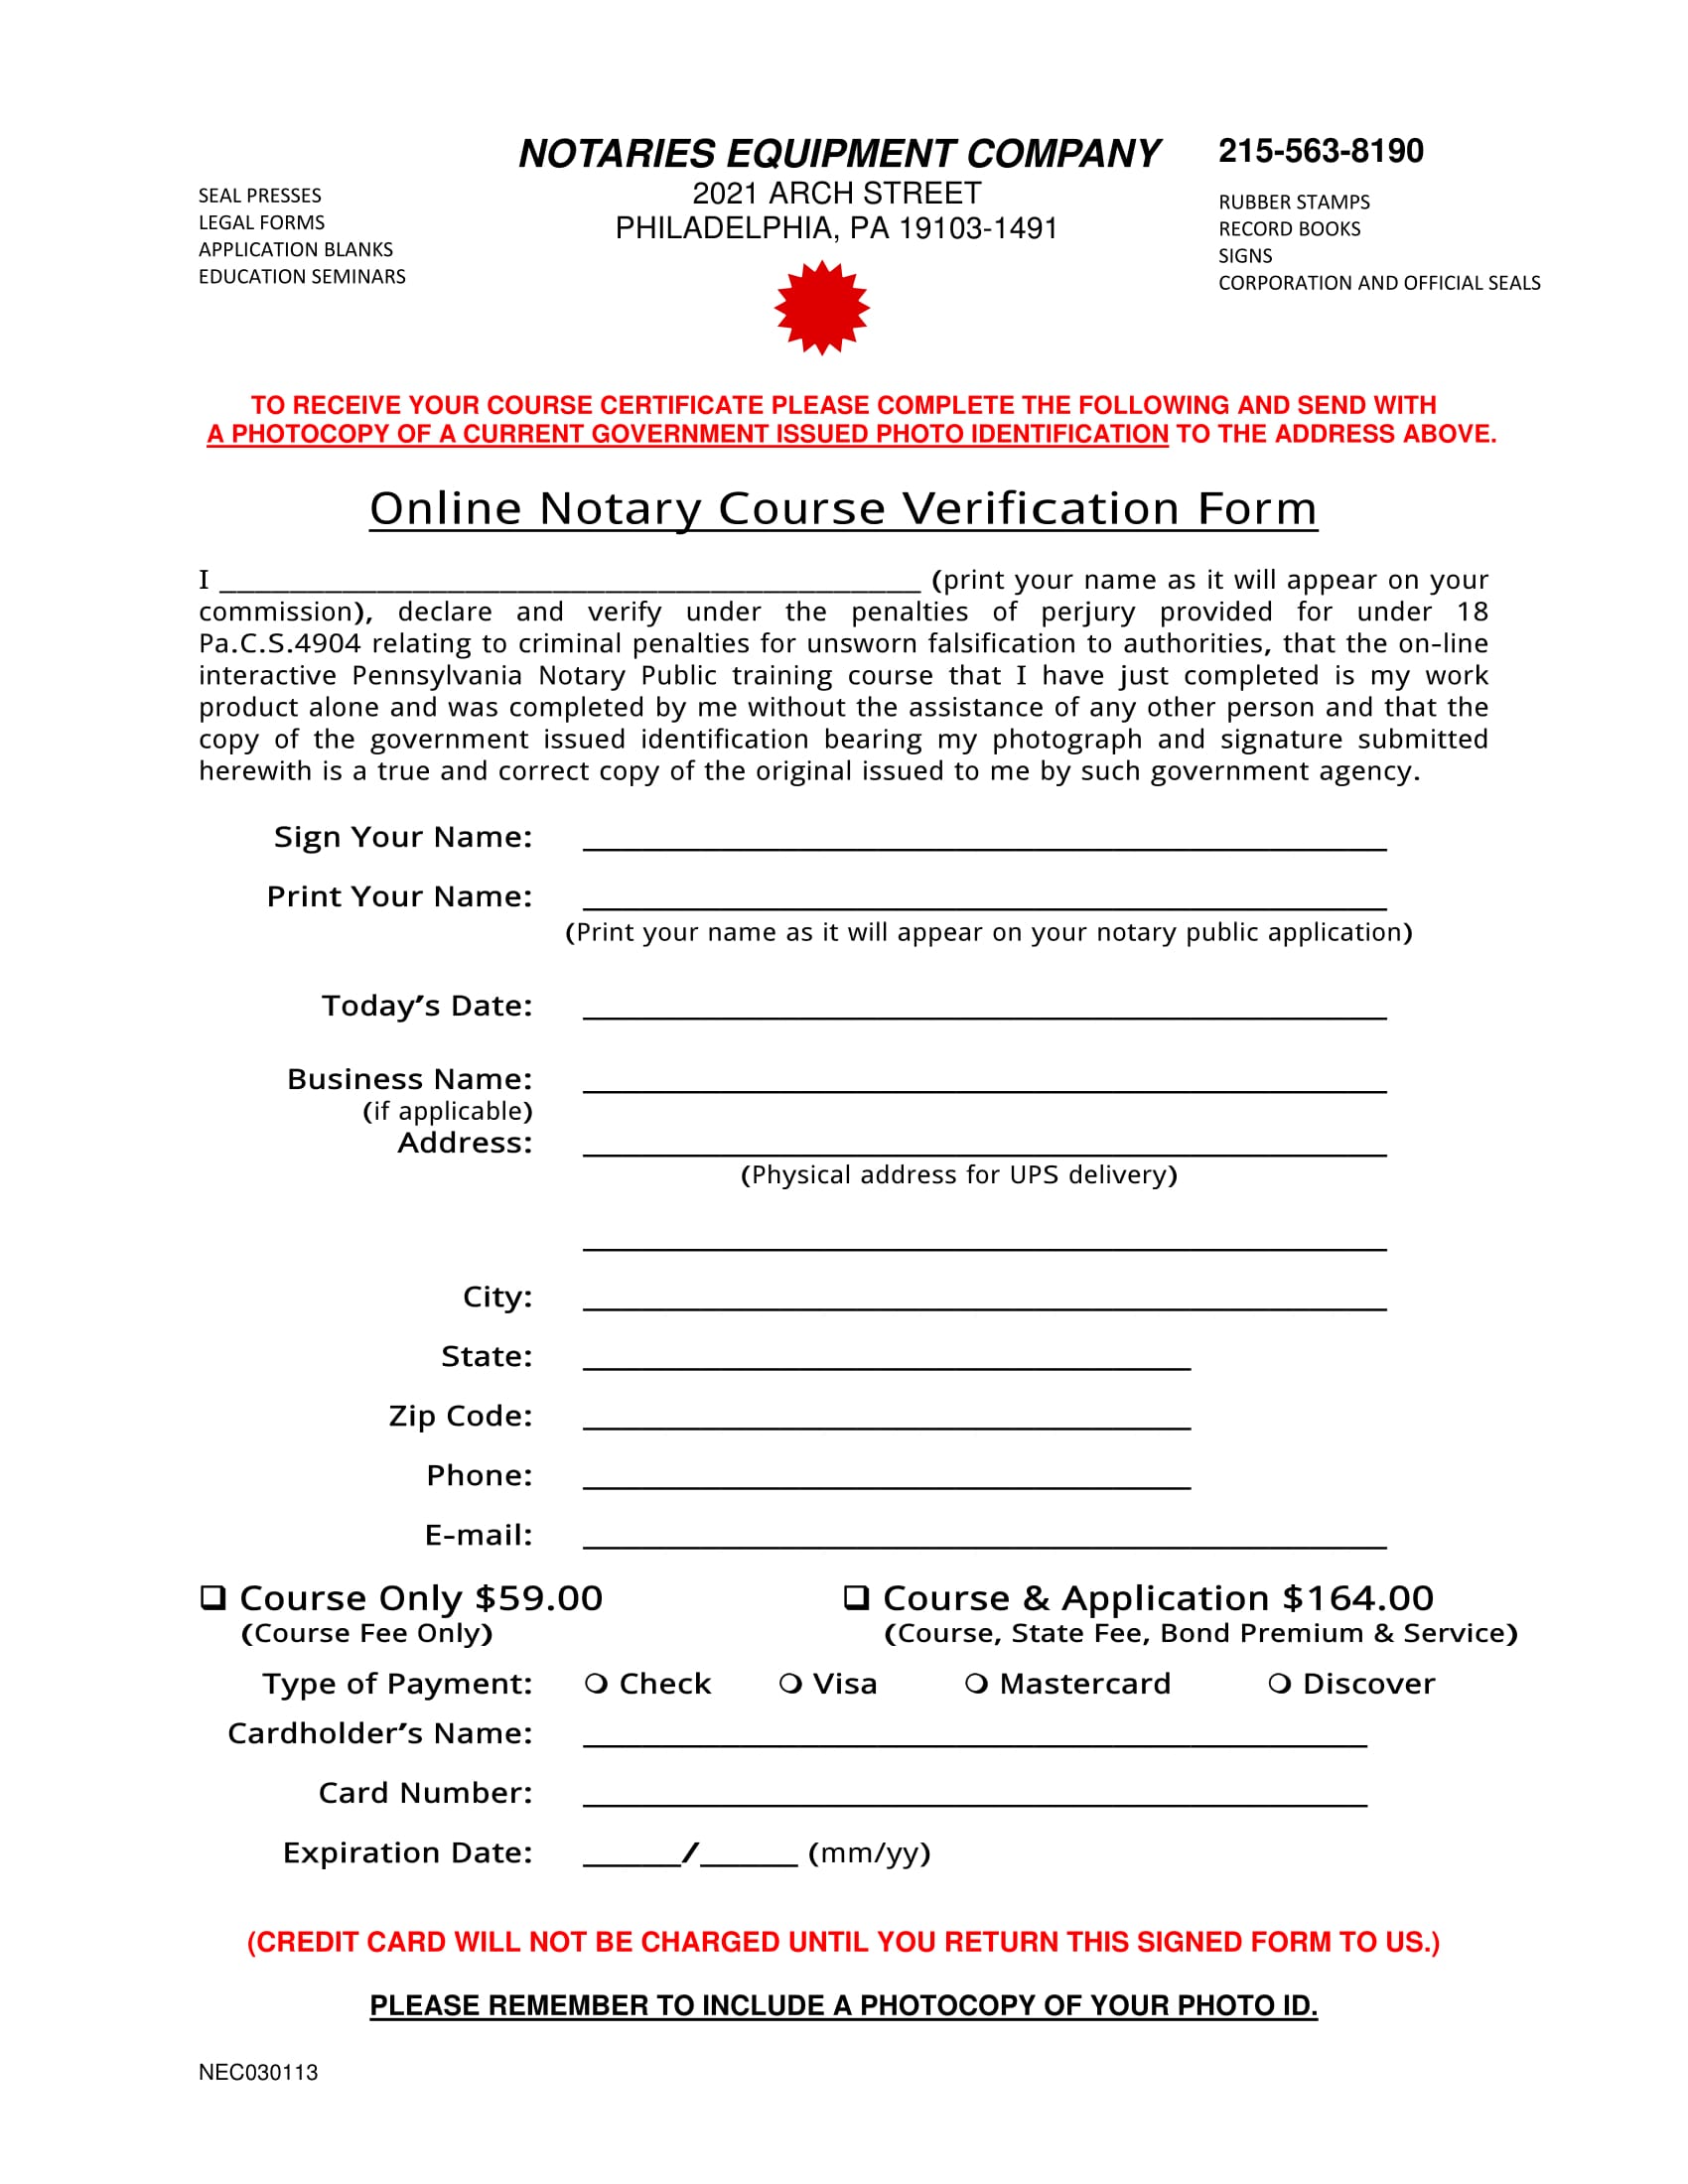 notary course verification form 1